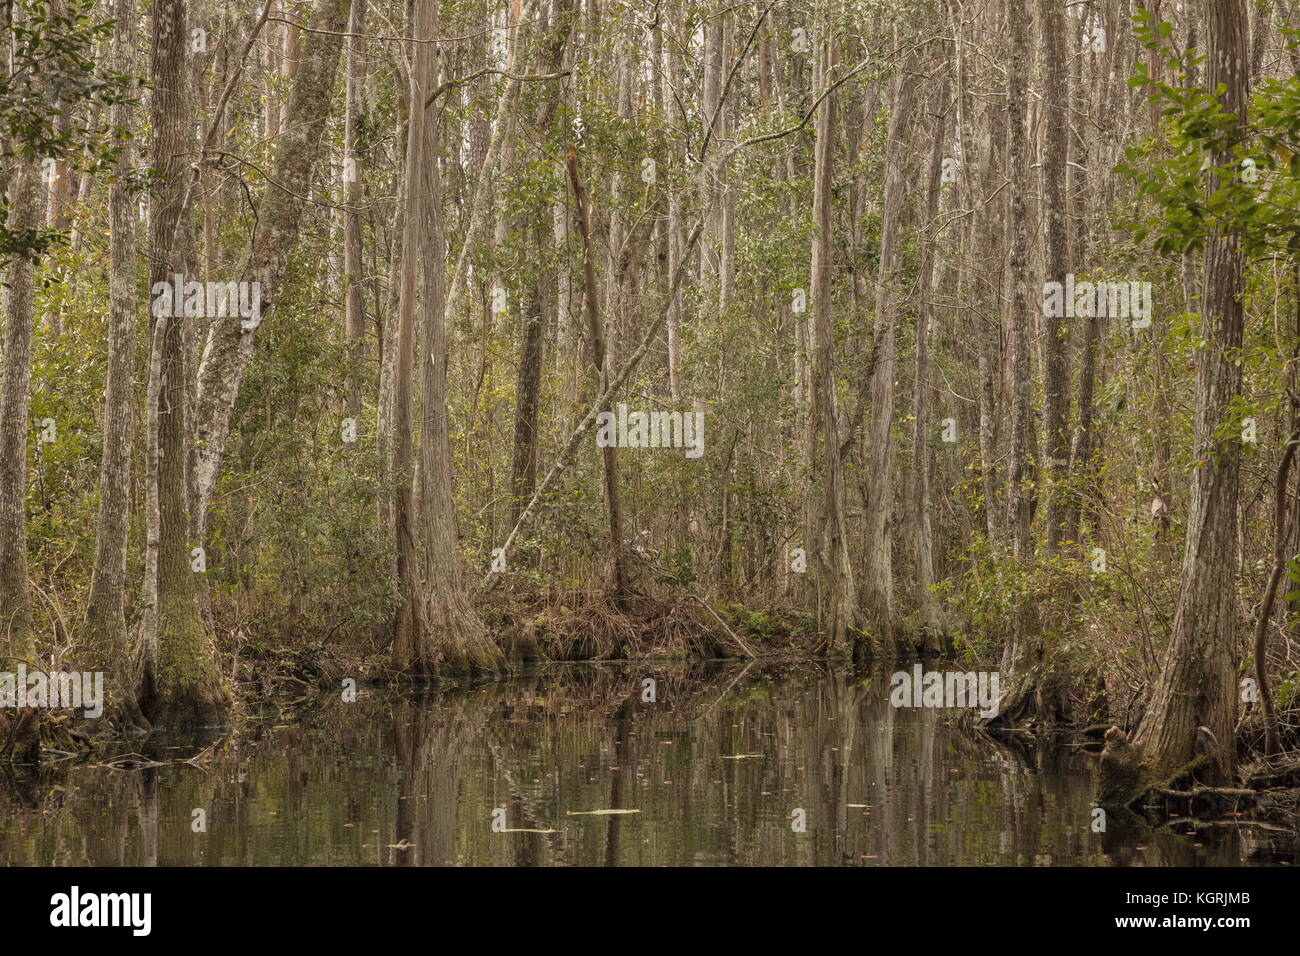 Creek or canal through Swamp Cypress forest in the Okefenokee National Wildlife Refuge, Georgia Stock Photo